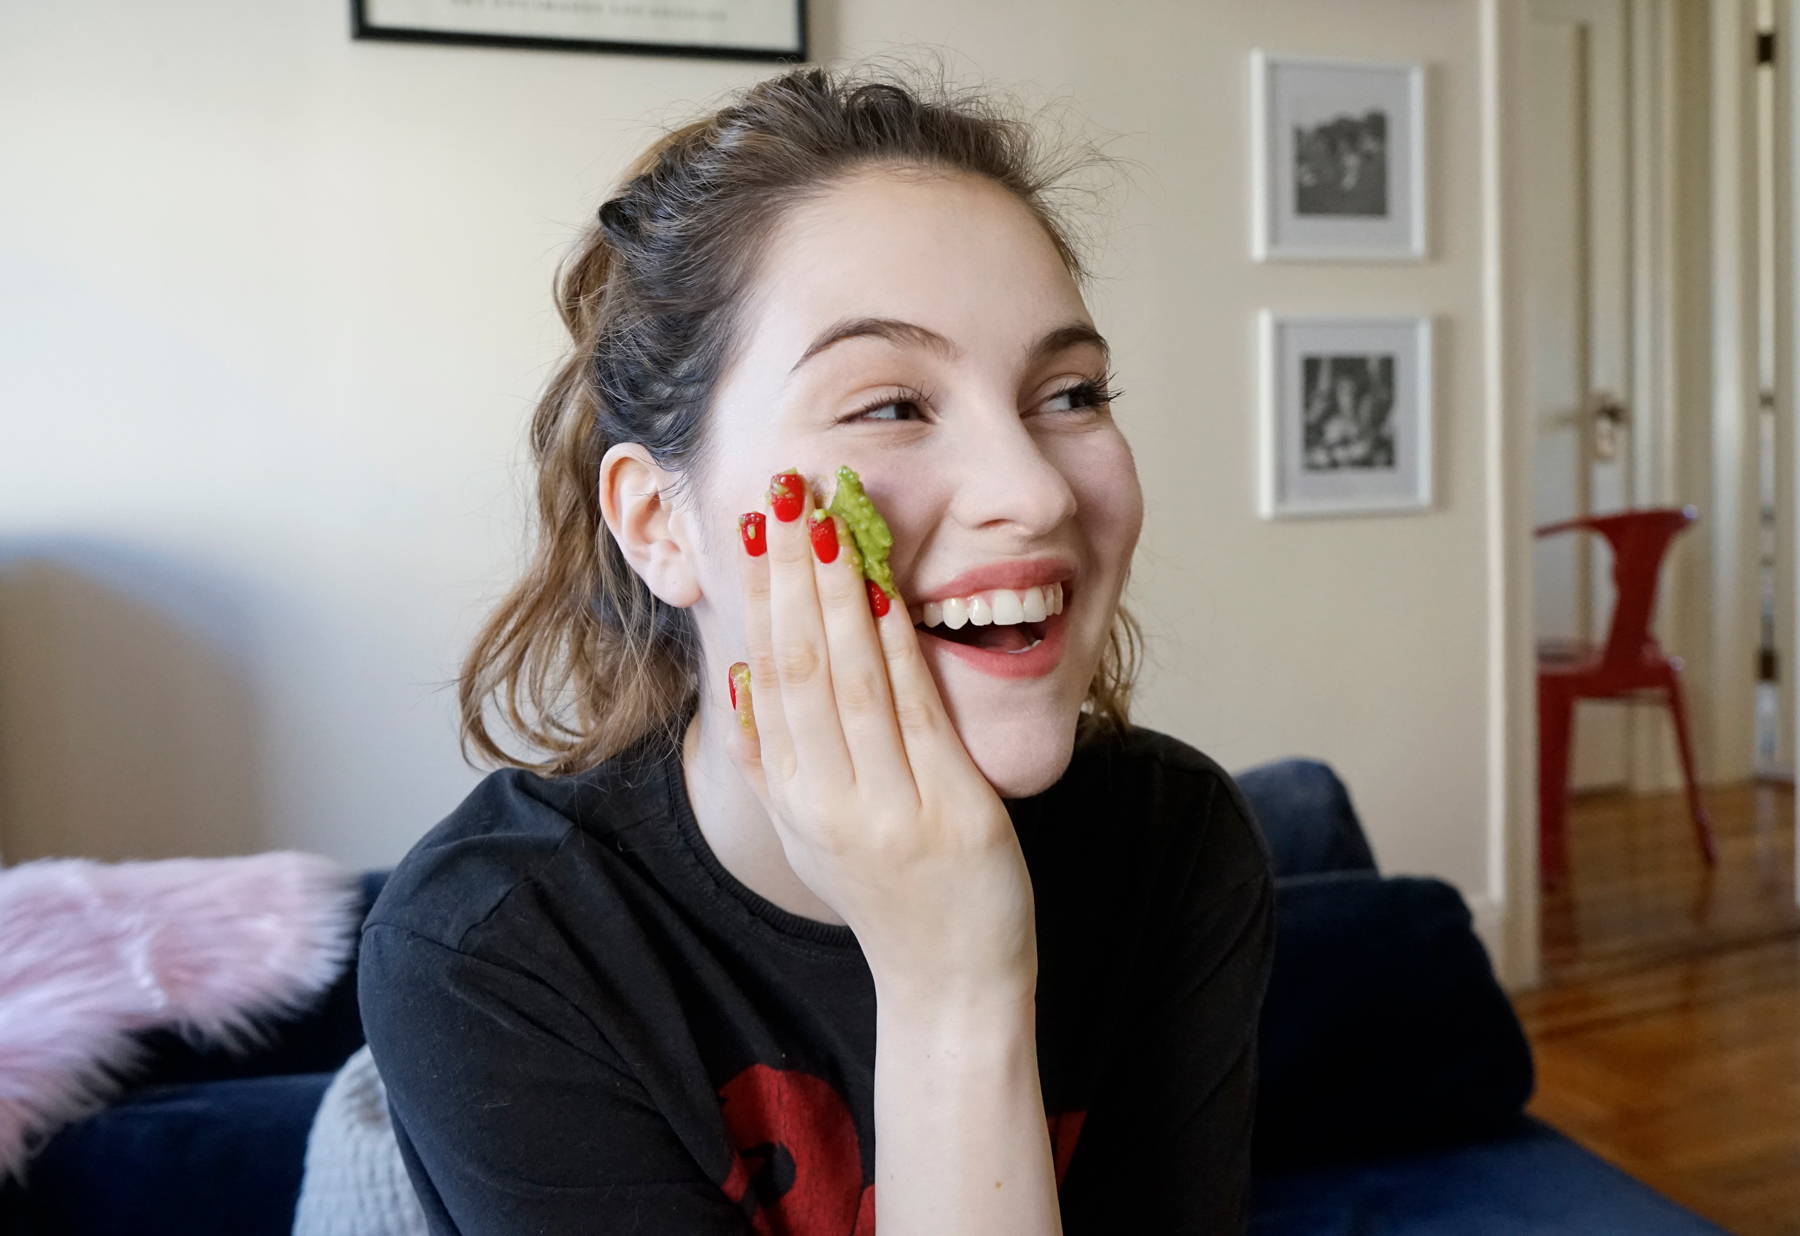 Julianne puts an avocado face mask for Unicorn Snot Galentine's Day. 